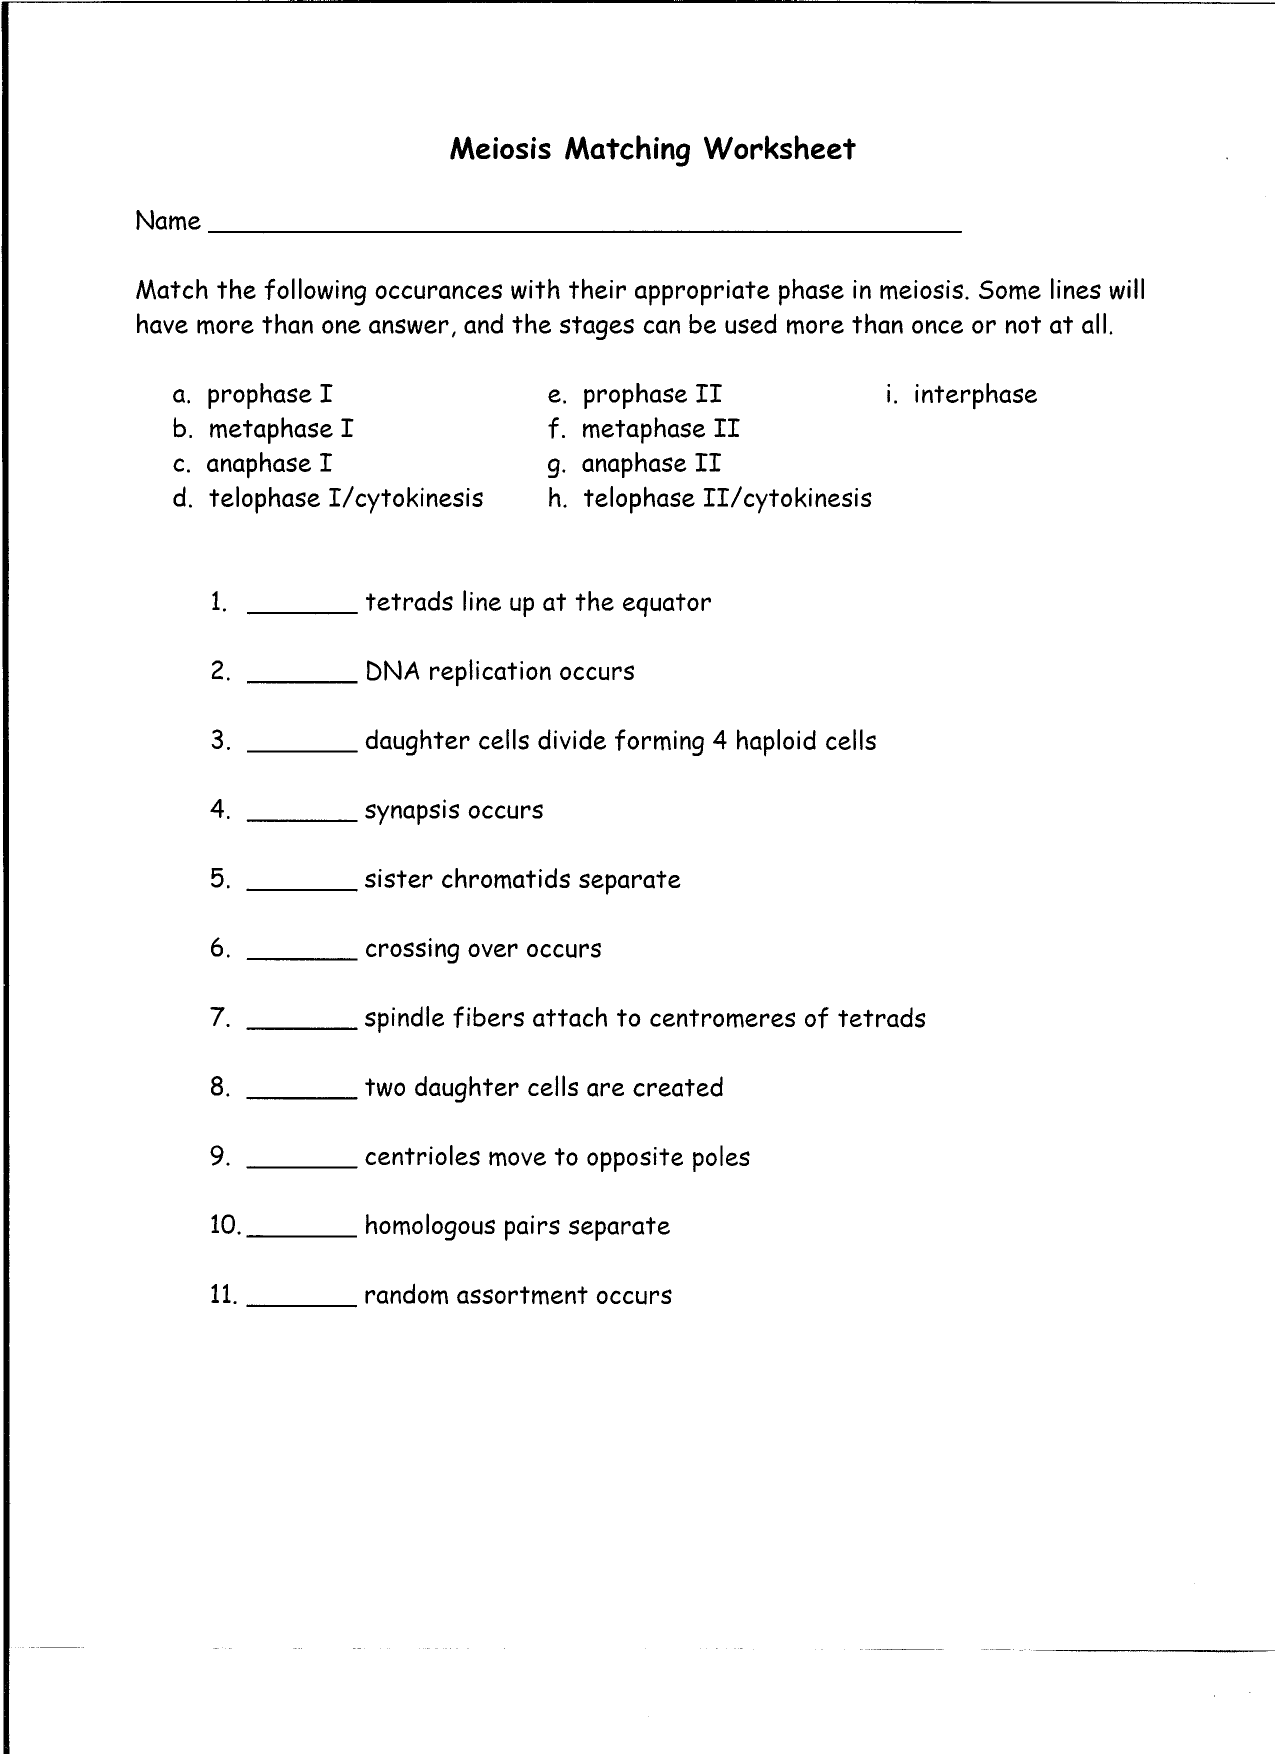 Meiosis Matching Worksheet For Meiosis Worksheet Vocabulary Answers